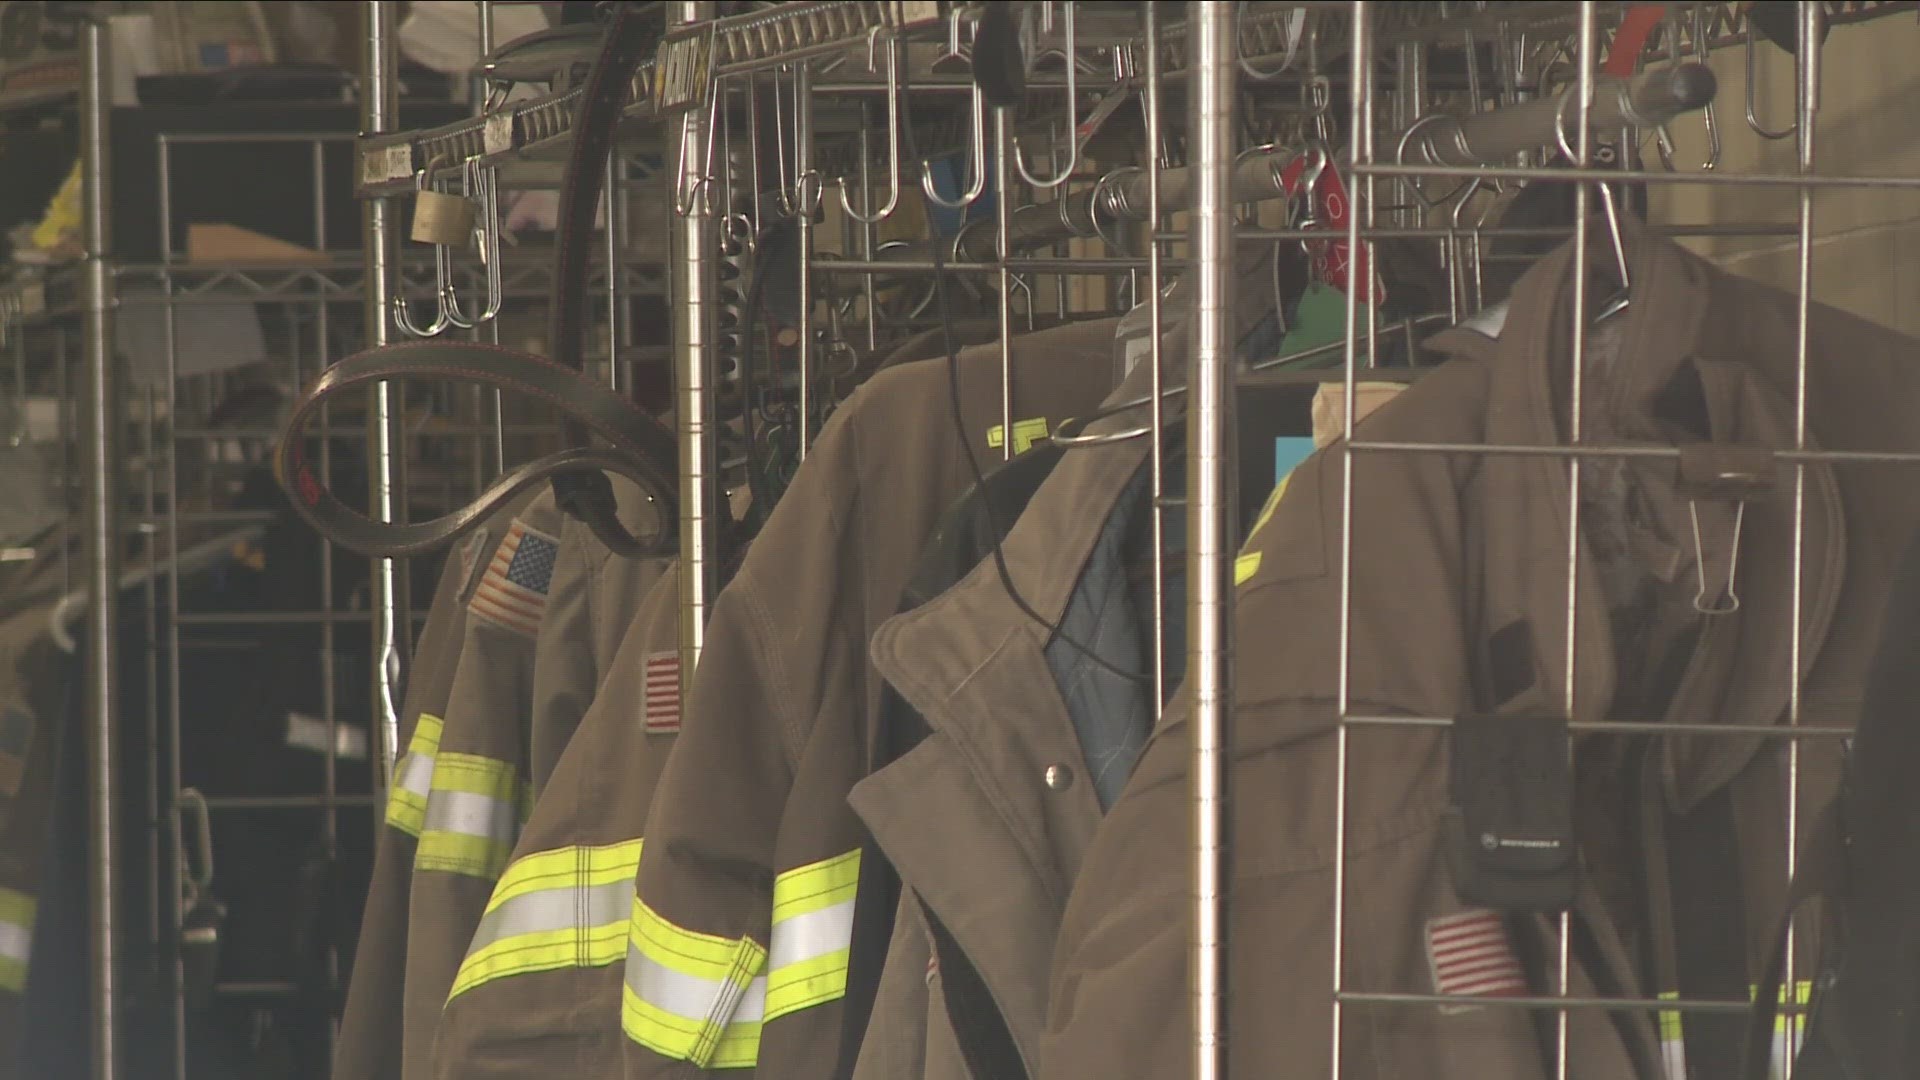 According to Congressman Brian Higgins these grants help fire stations get up to date equipment and training so they can keep their communities safe.